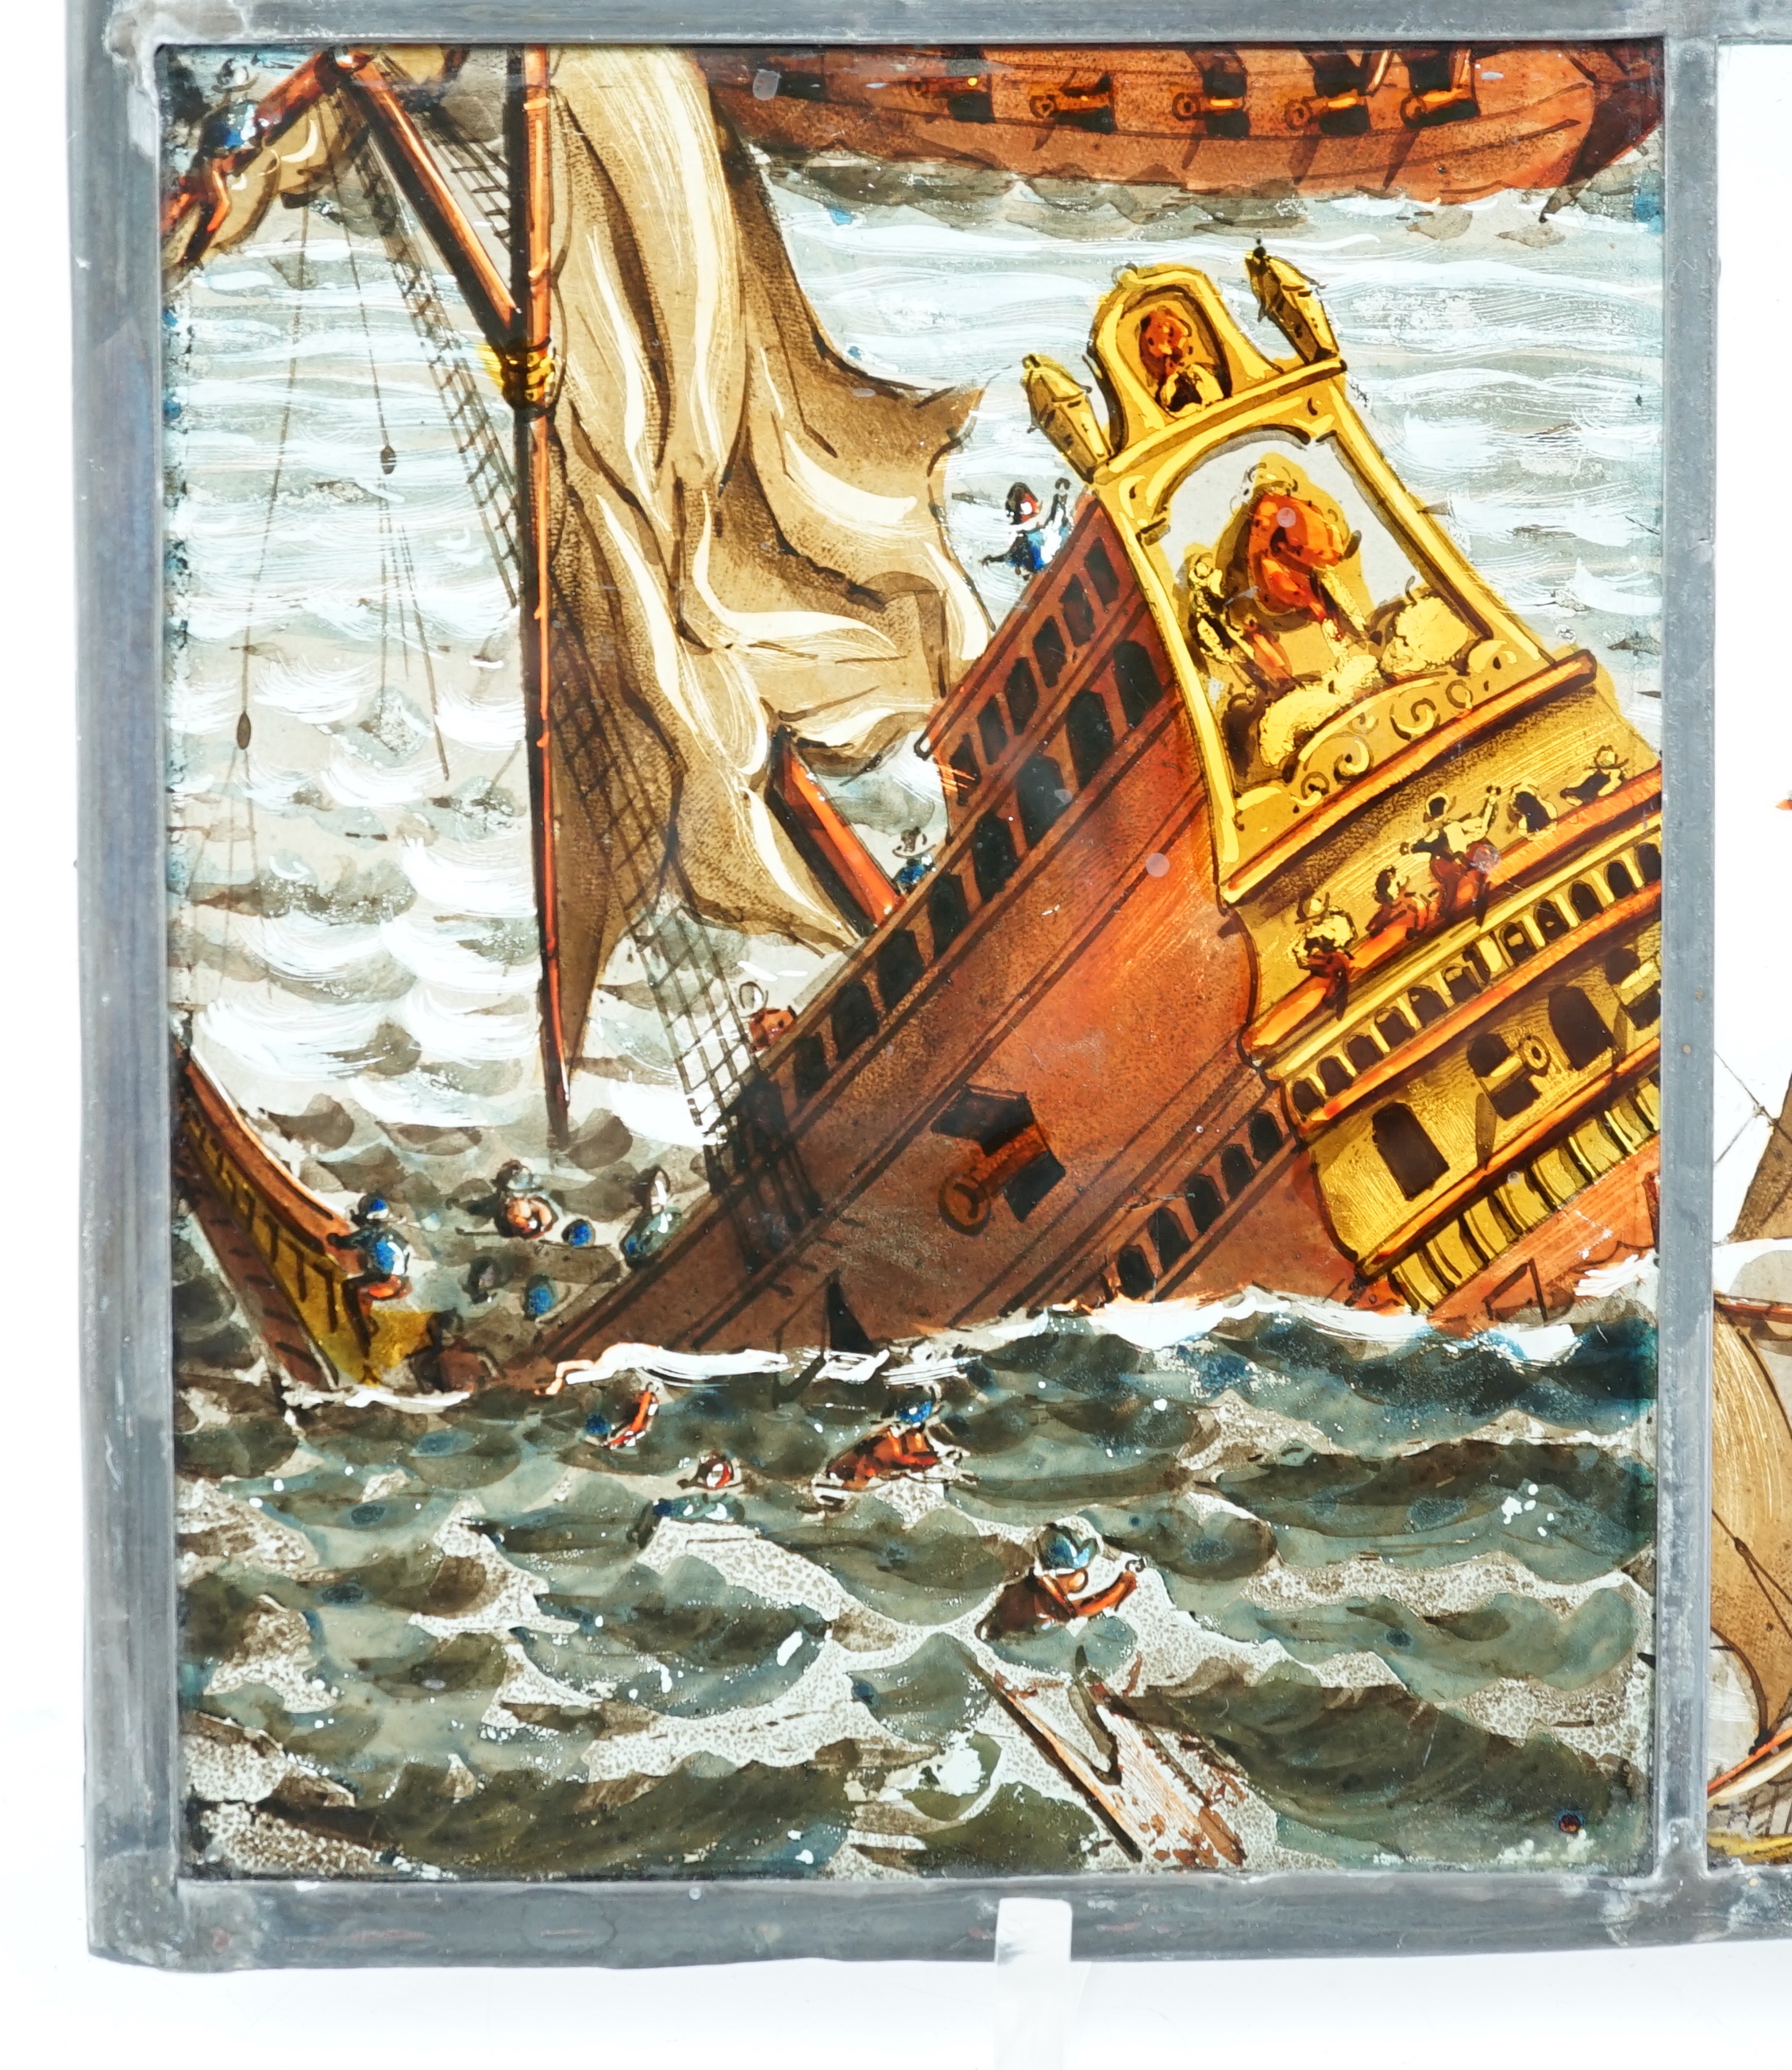 A 18th century Dutch stained glass panel made from four sections depicting a shipwreck and the sails of a fighting galleon, overall 28 x 23cm